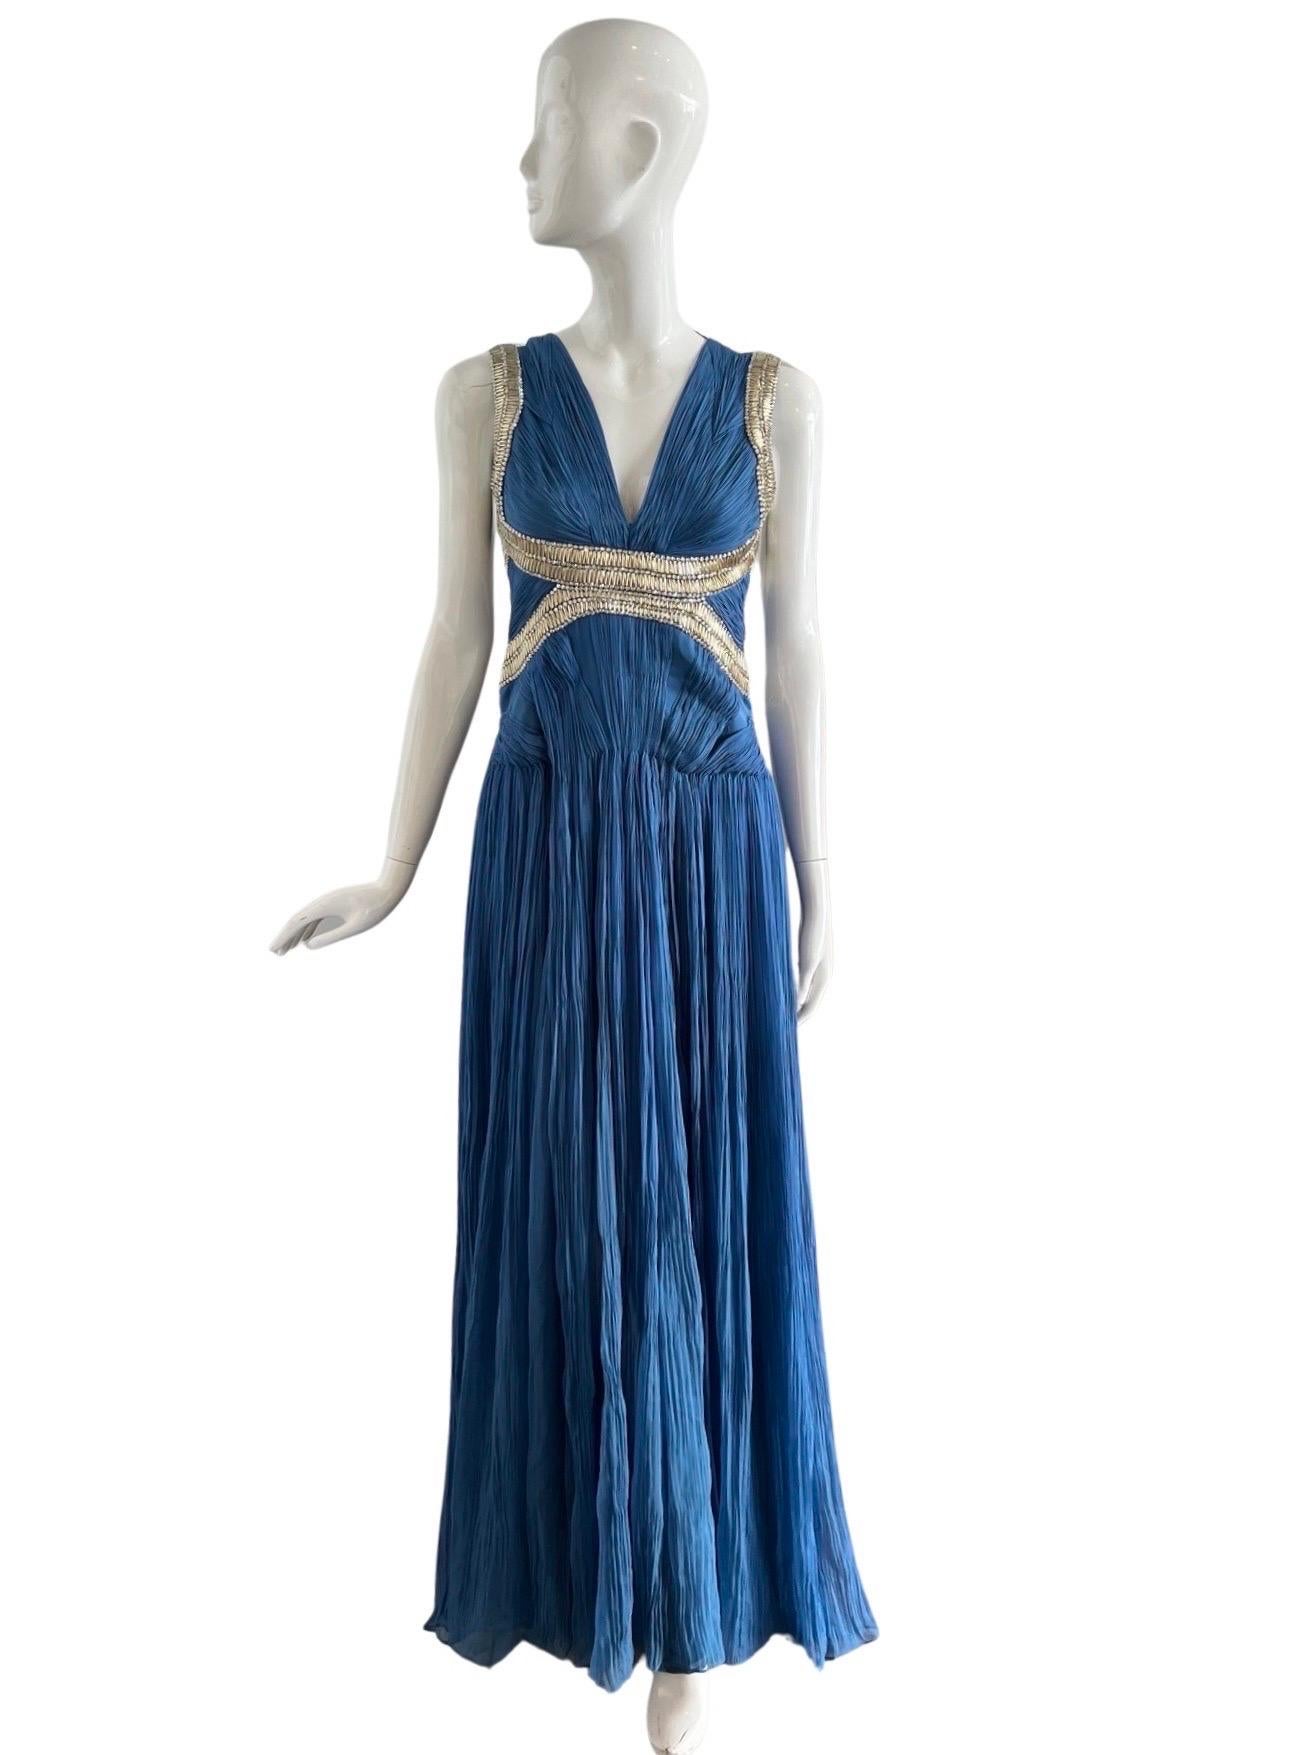 Stunning Roberto Cavalli gown in a blue chiffon silk heavily pleated in a Grecian manner, gathered in sections in the hip area.  The intricate beading is done with clear gem like beads and long tube gold beads interwoven with gold thread.  The back